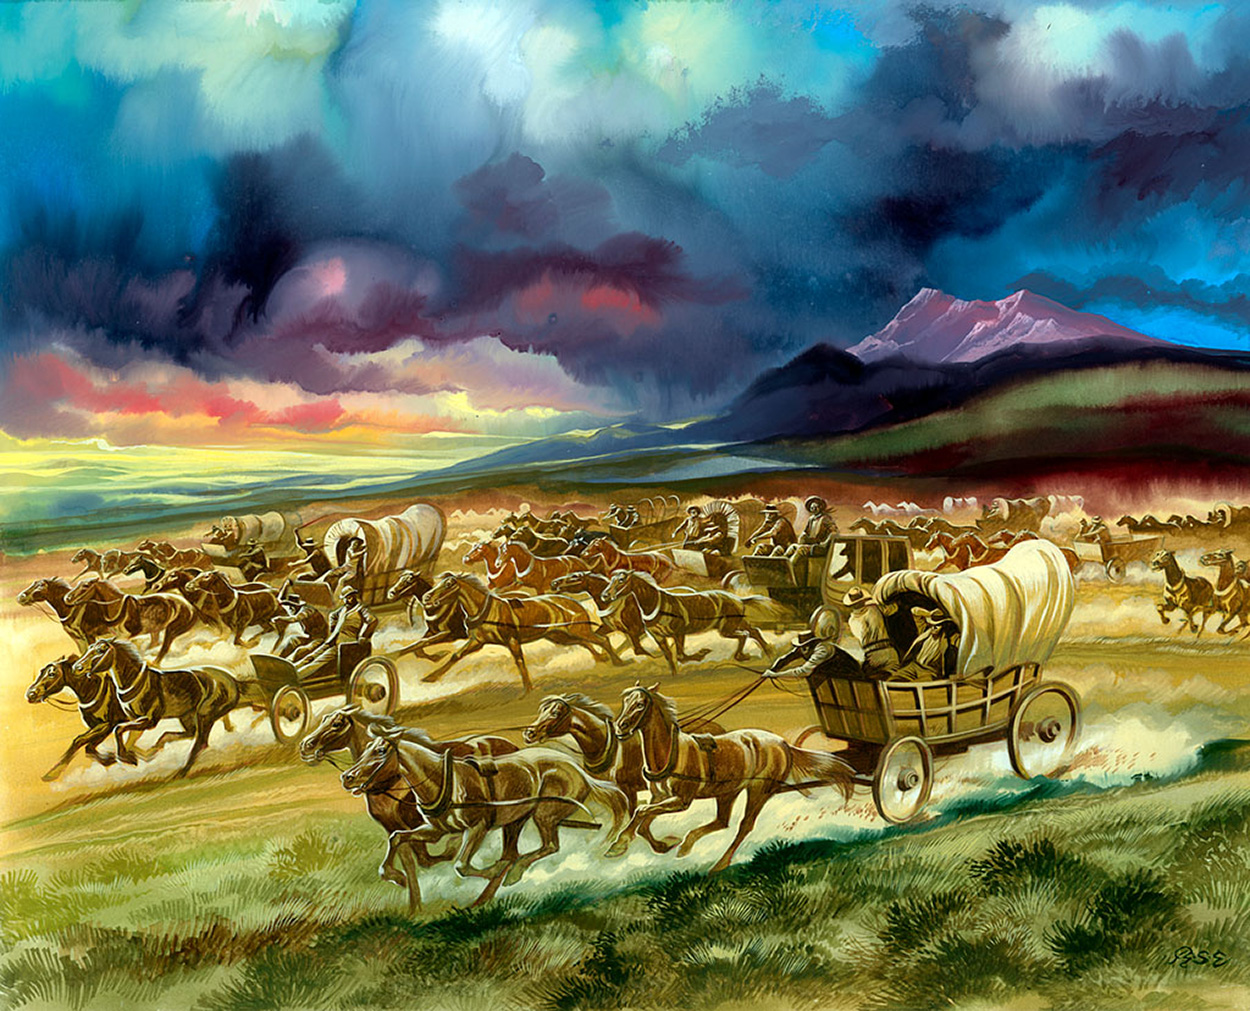 Western Land Race (Original) (Signed) art by The Winning of the West (Ron Embleton) at The Illustration Art Gallery